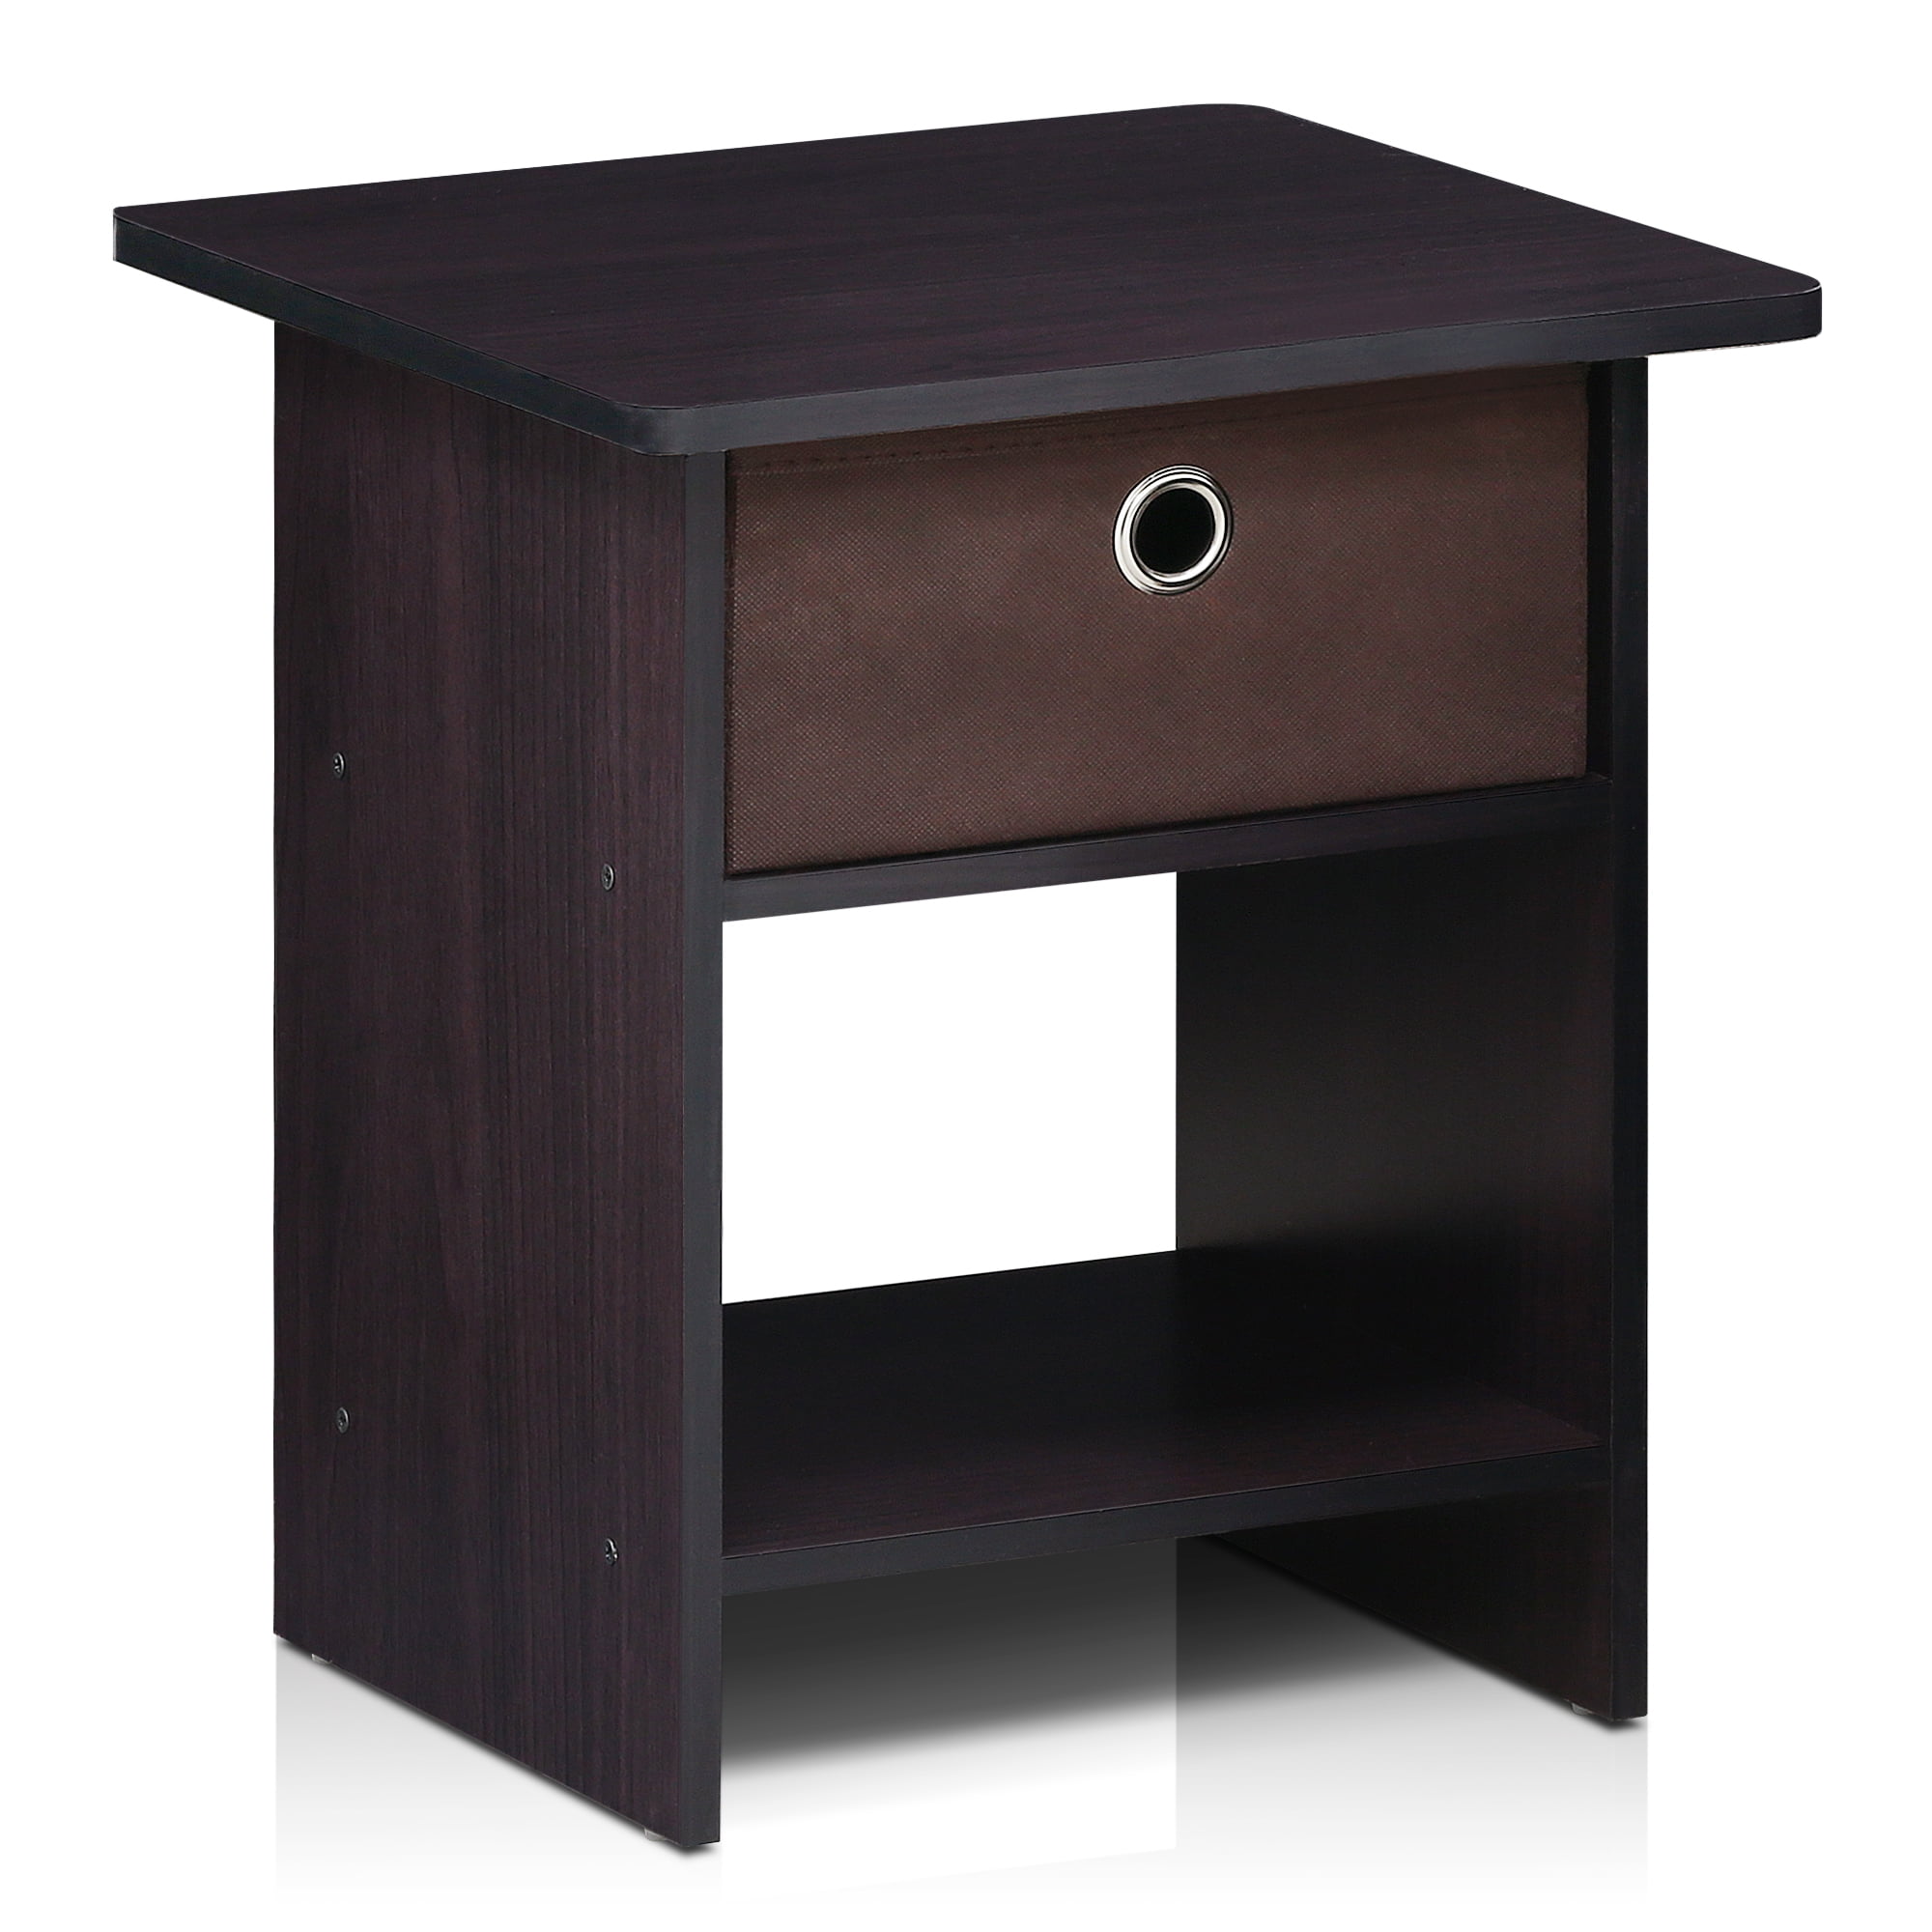 18 Inches Black Winsome Wood End Table/night Stand With Drawer and Shelf for sale online 